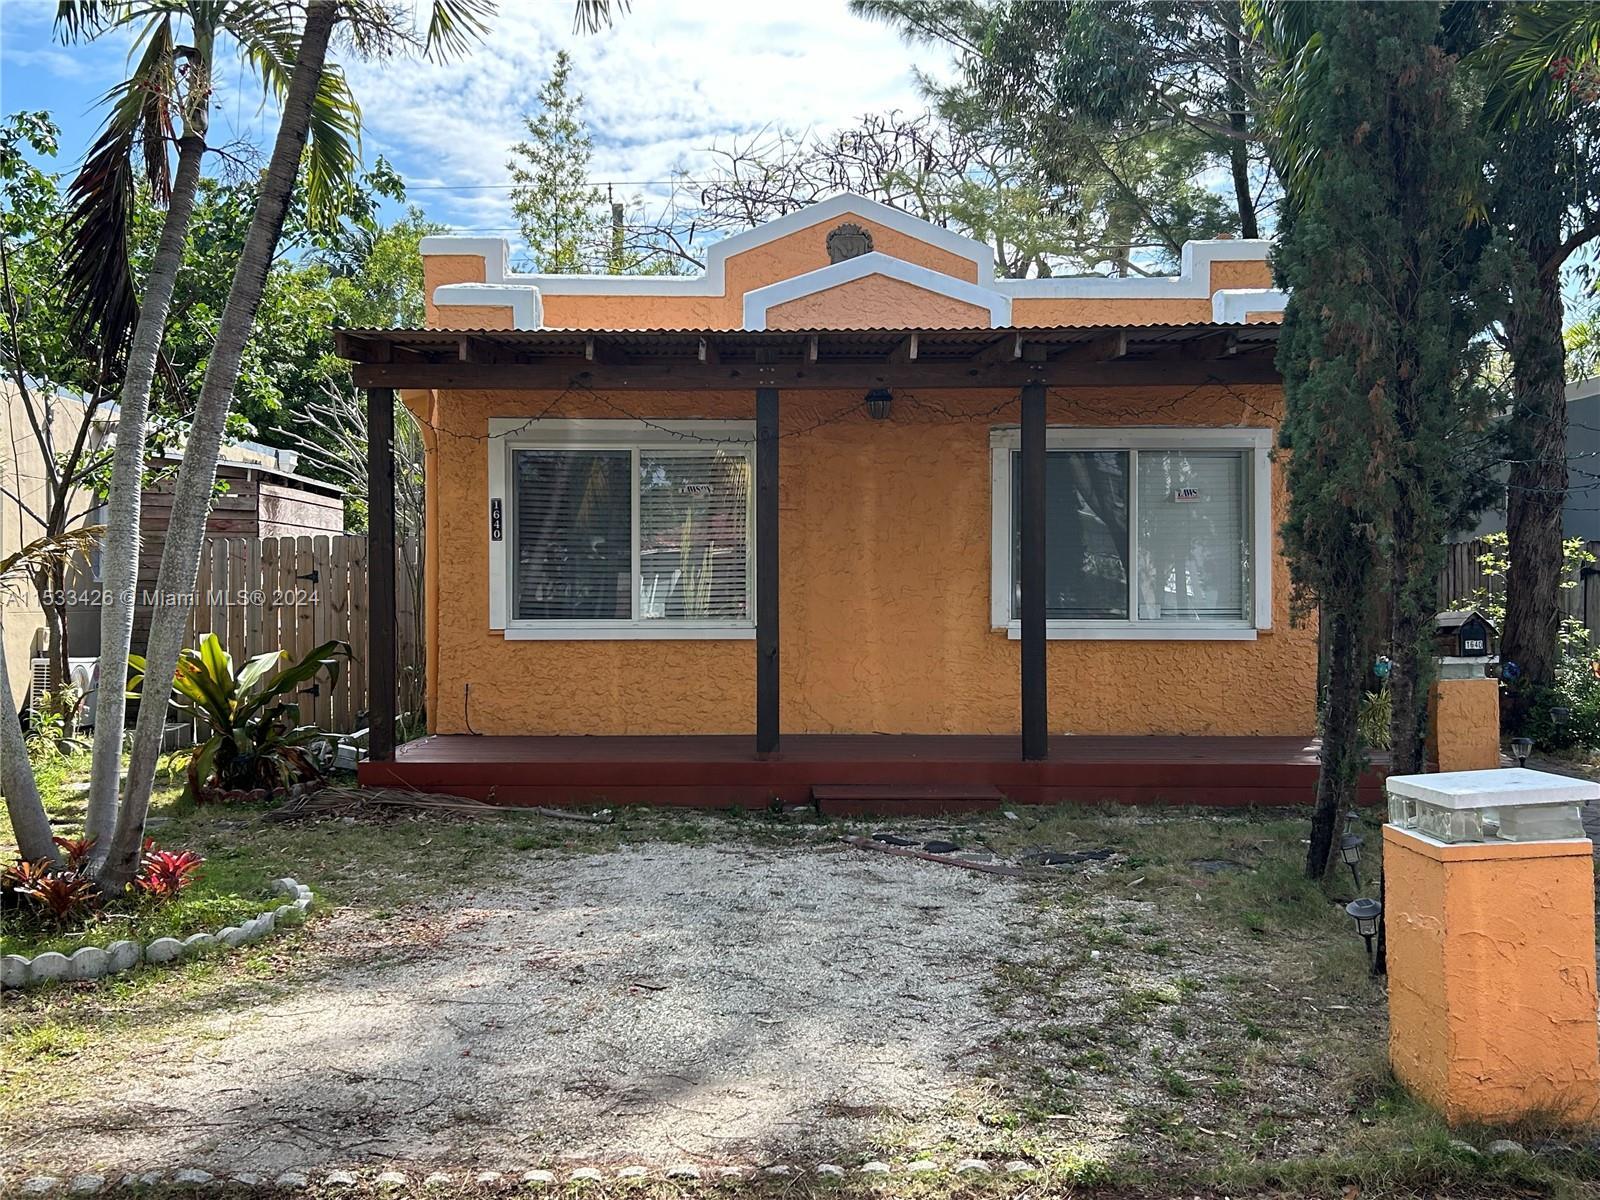 Available 2BR/1BA single-family home with a backyard in East Hollywood. It is located near downtown 